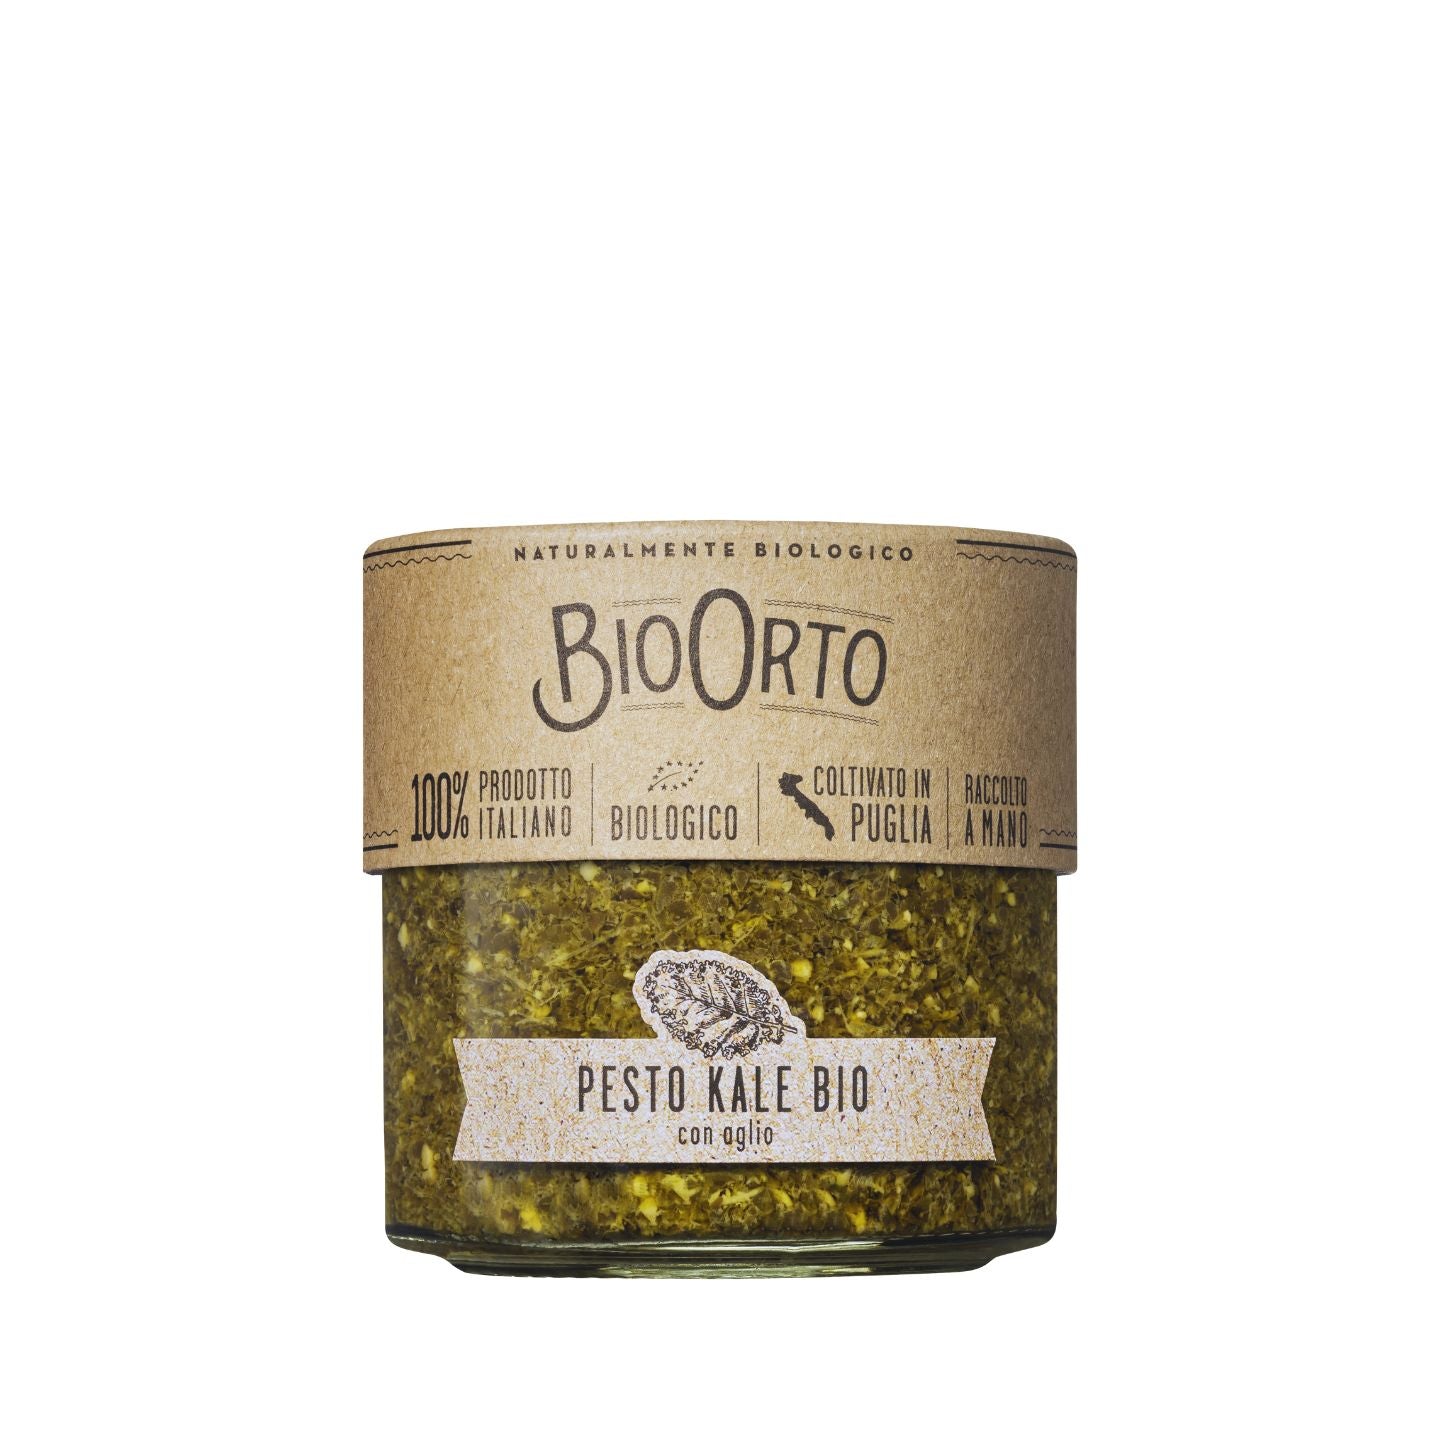 Bio Orto Organic Kale Pesto with Garlic 180g  | Imported and distributed in the UK by Just Gourmet Foods